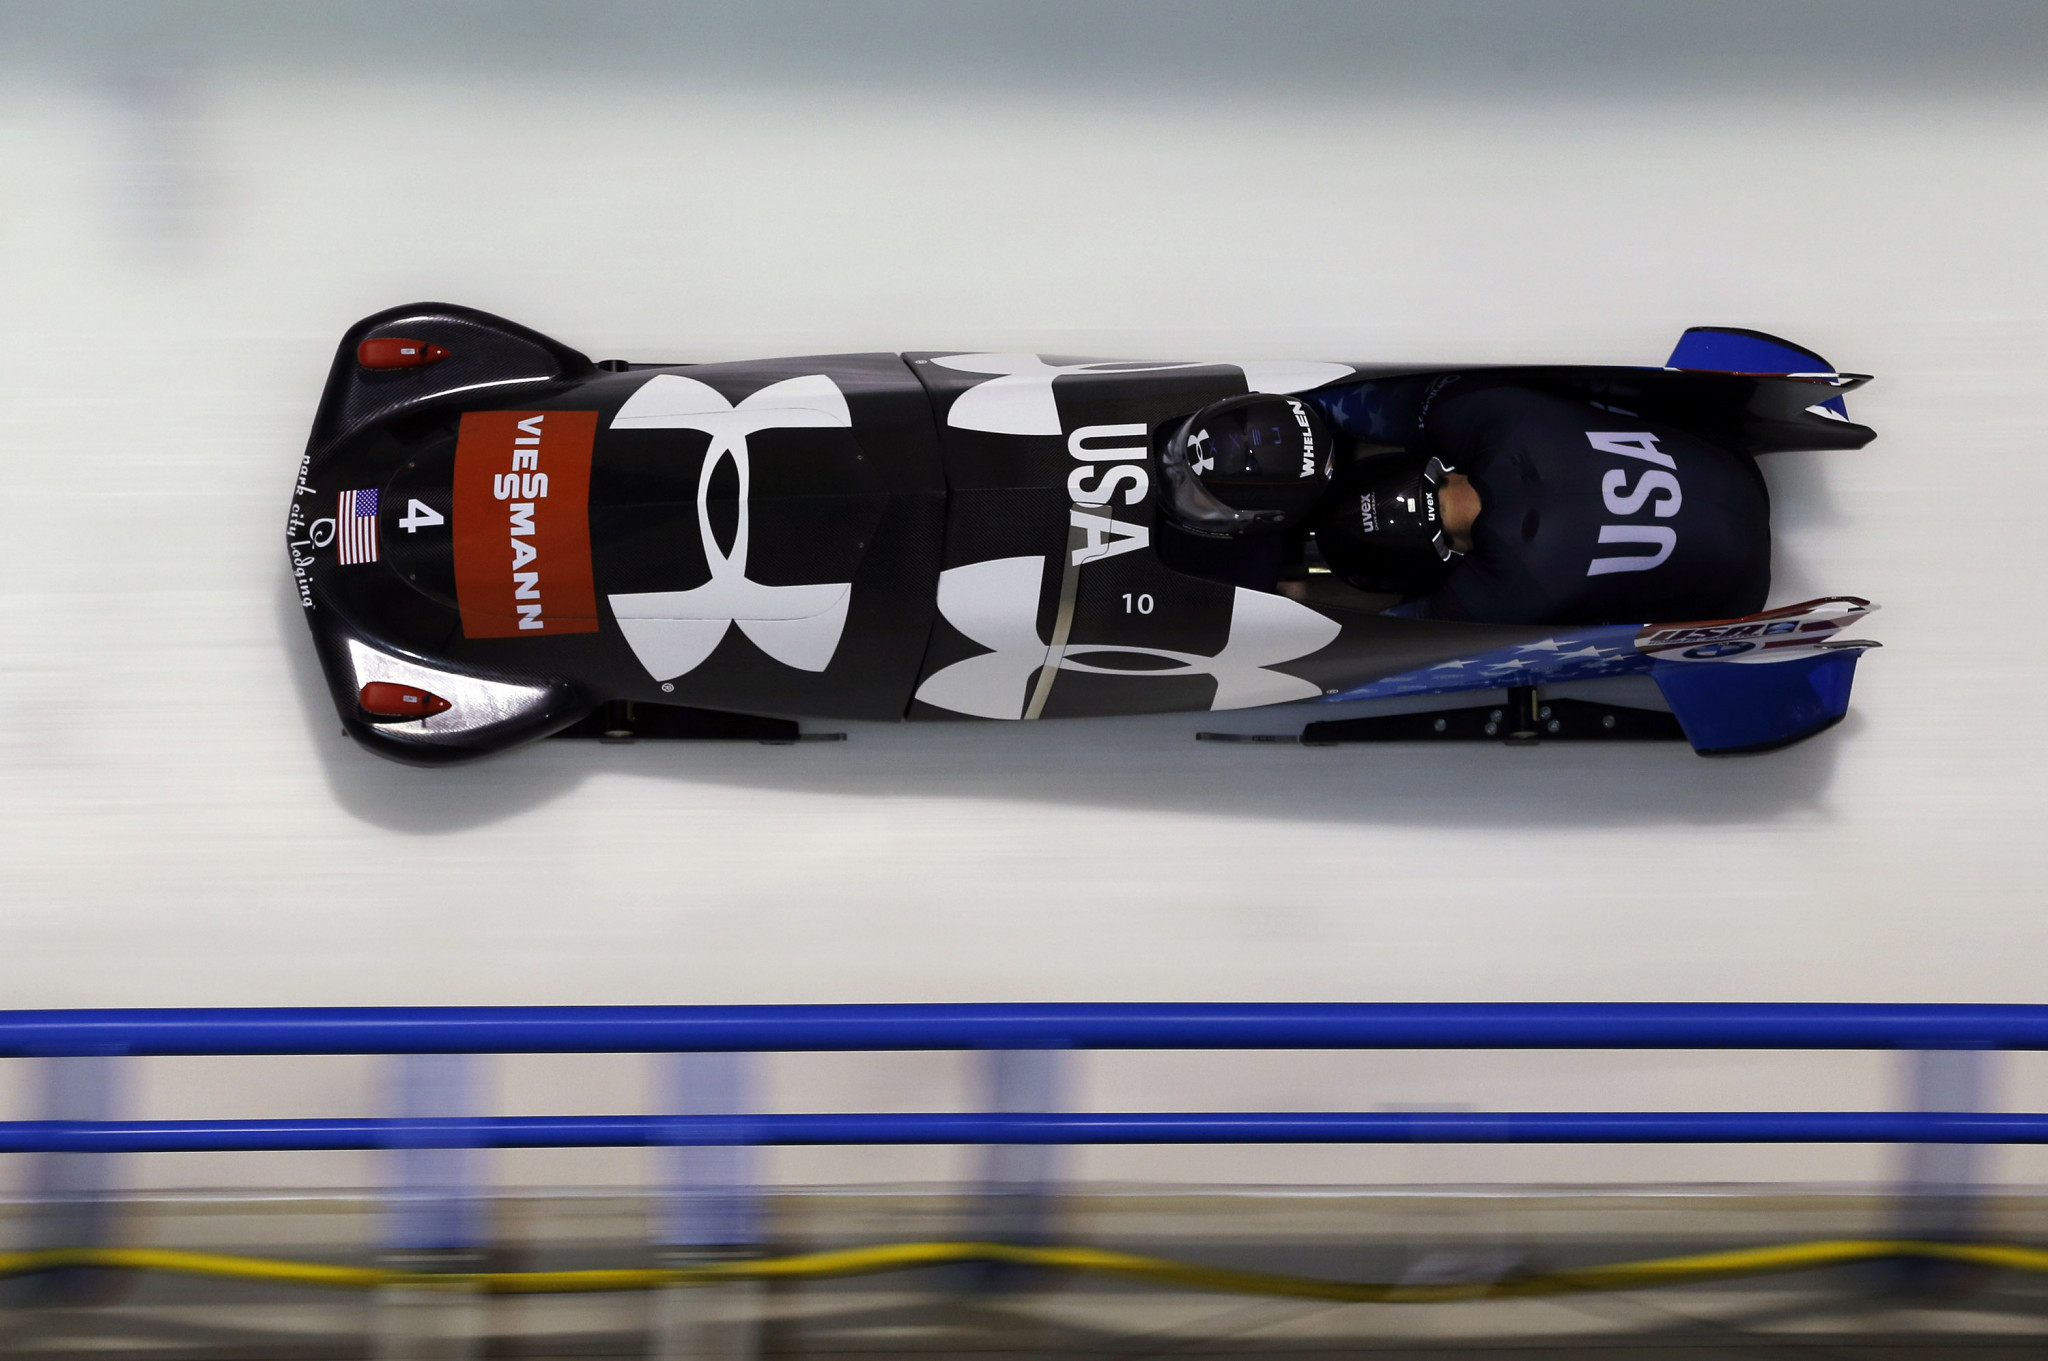 Homologation process for Beijing 2022 bobsleigh track delayed due to coronavirus